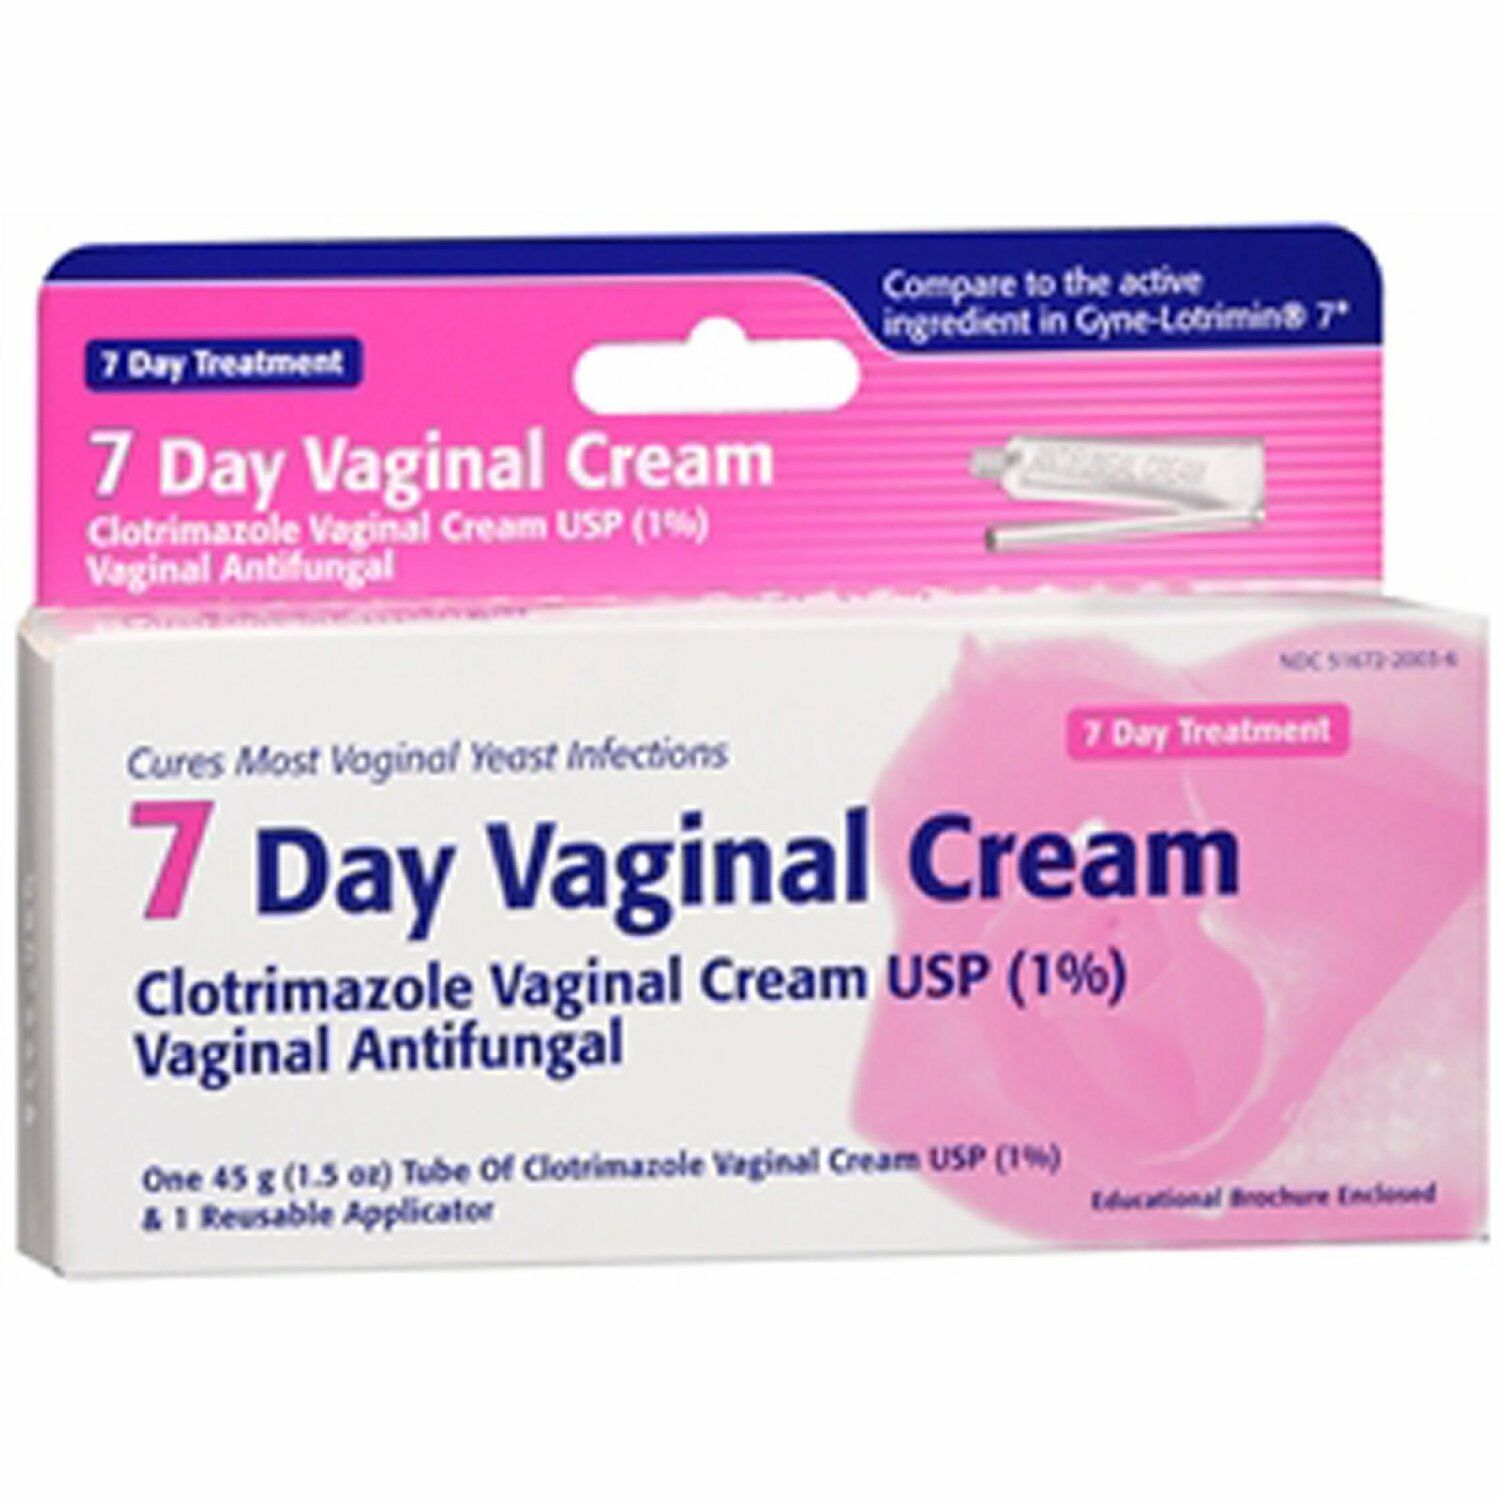 7 Day Vaginal Antifungal Cream Usp 1% With Applicator Compare To Gyne-lotrimin